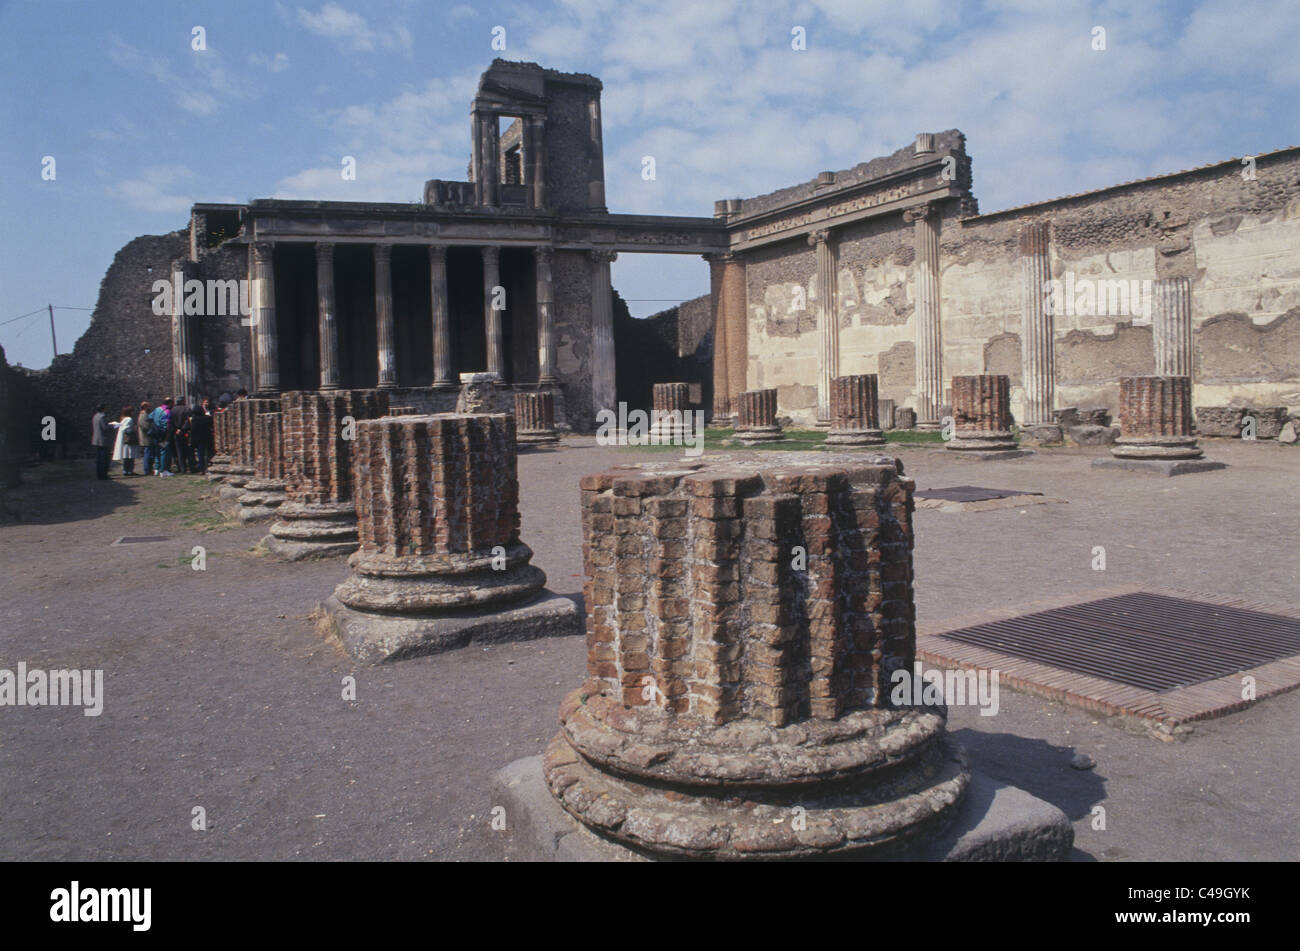 Photograph of an ancient Roman temple in Italy Stock Photo